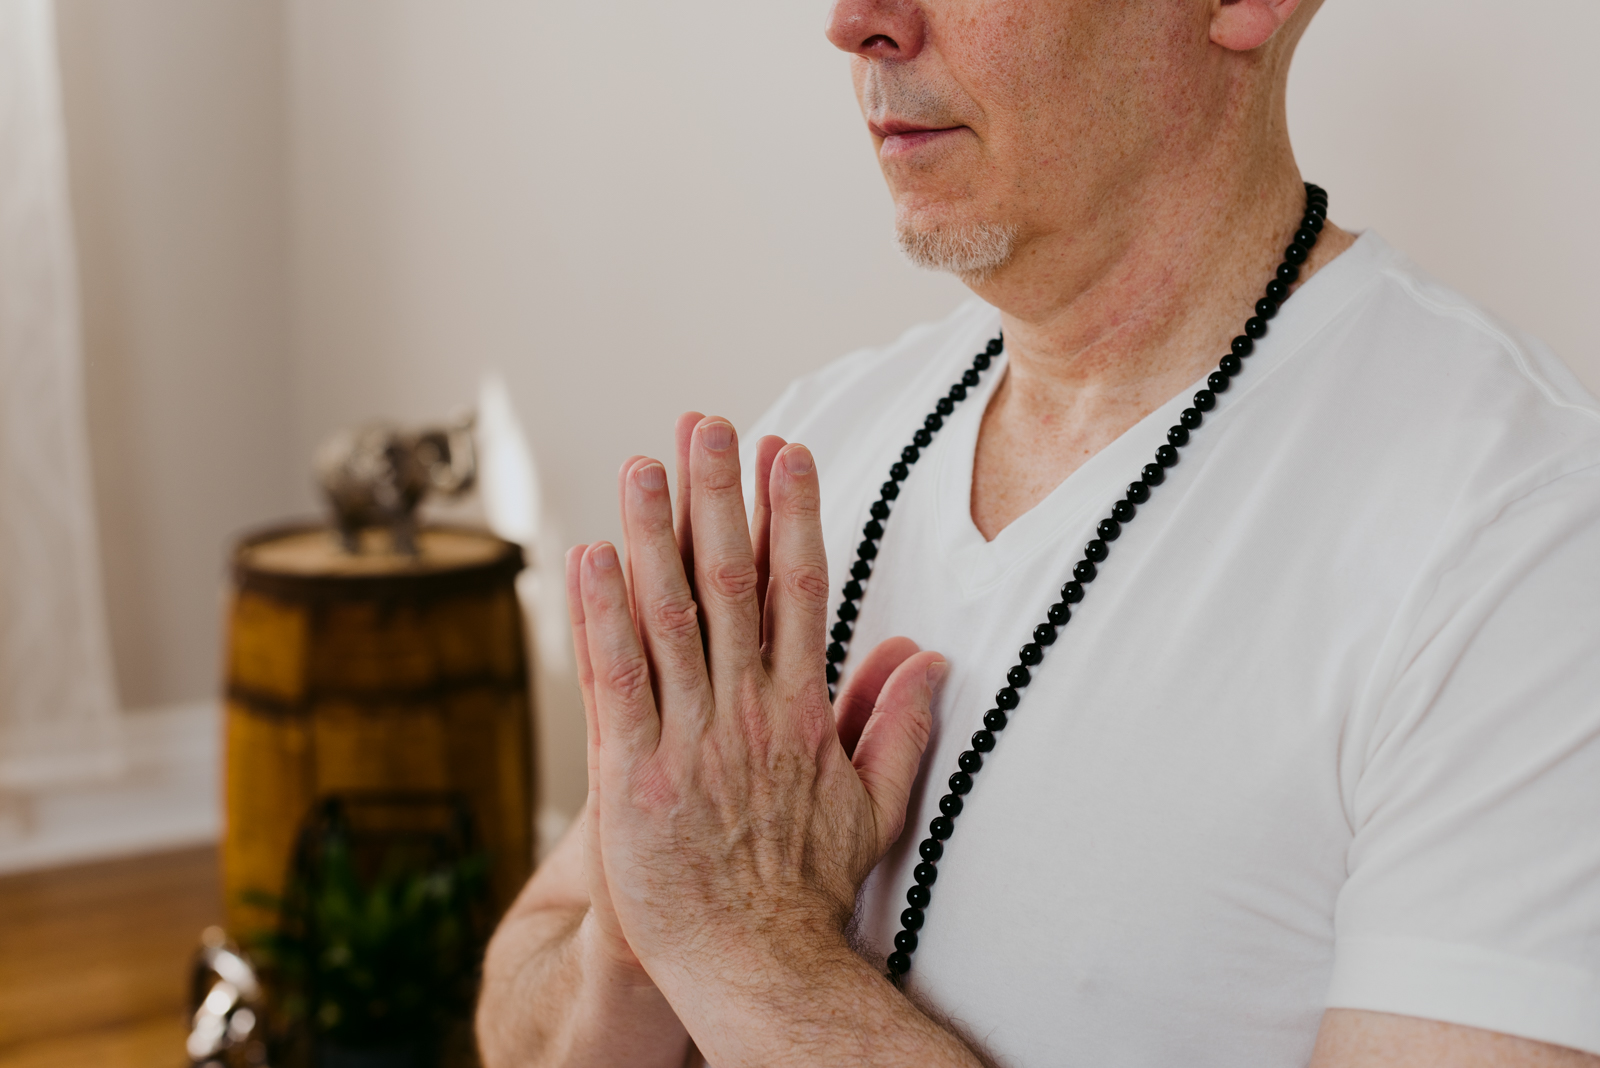 yoga teacher meditating with black mala on and hands at heart